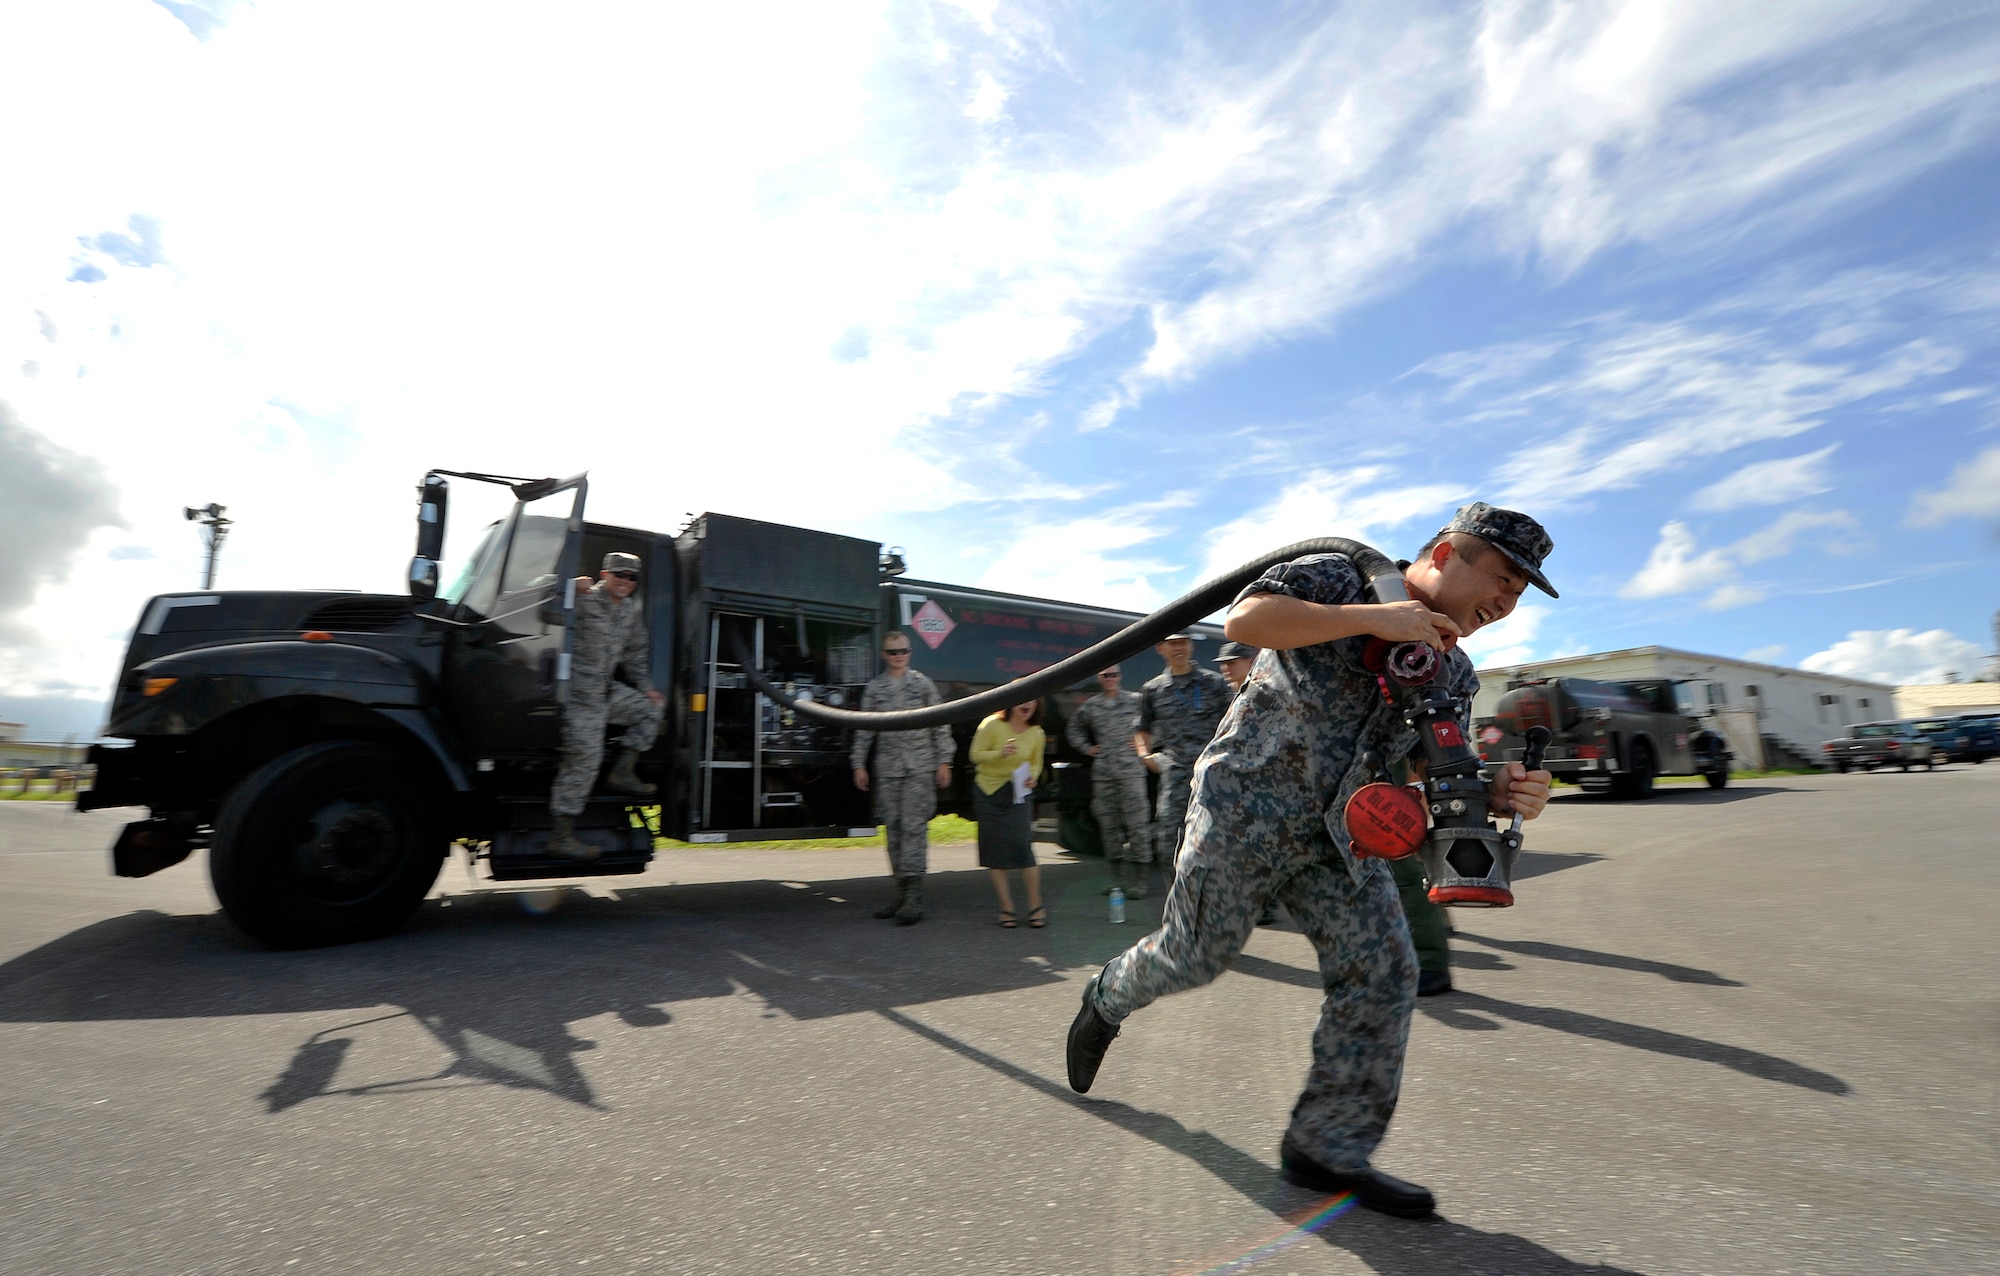 Japan Air Self Defense Force Capt. Takehiro Okabayashi, Headquarters Southwestern Composite Air Division, Naha Air Base, demonstrates pulling the hose of an R-11 fuel truck during their tour, July 21, 2016, at Kadena Air Base, Japan. The benefits of this tour for both parties are the opportunity for professional networking throughout Okinawa's fuels community and the sharing of ideas on the most effective methods and equipment for delivering jet fuel. (U.S. Air Force photo by Naoto Anazawa)